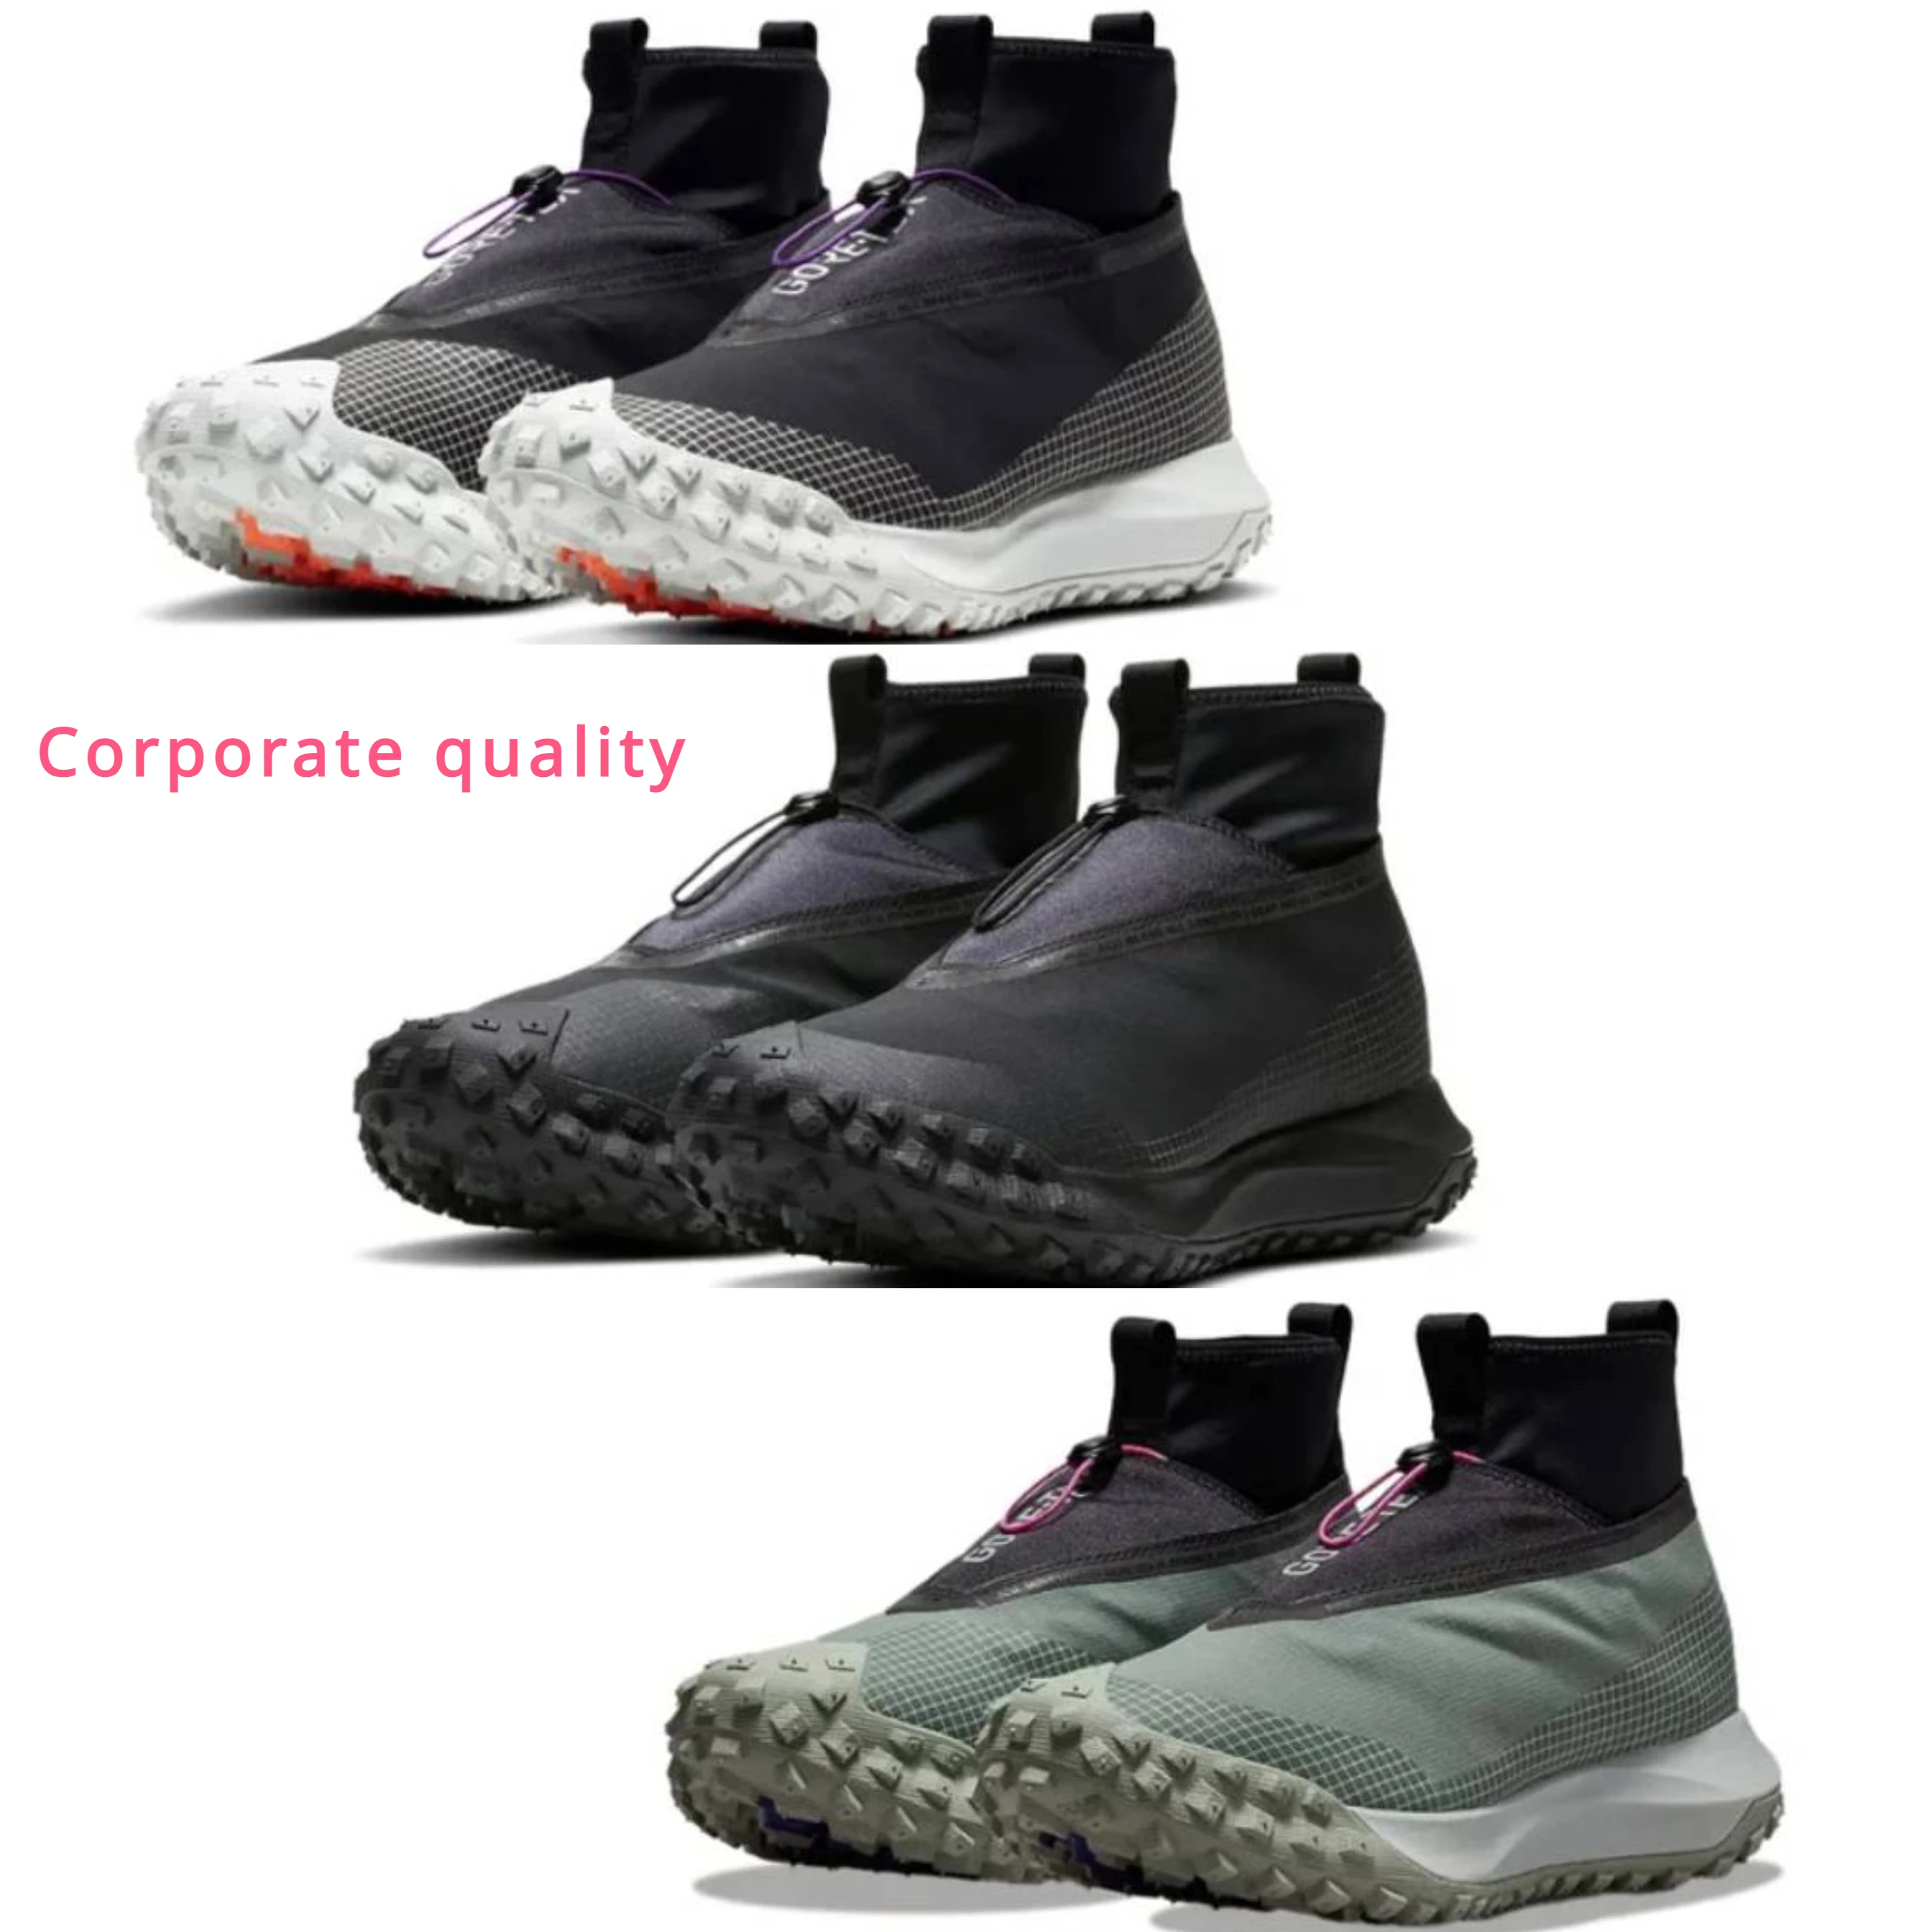 

New 2023 Men Women Outdoor Sport Shoes Sneaker Running Athletic Mountain Fly High GORE-TEXDark Grey ACG Sneakers Tire Tank Boots